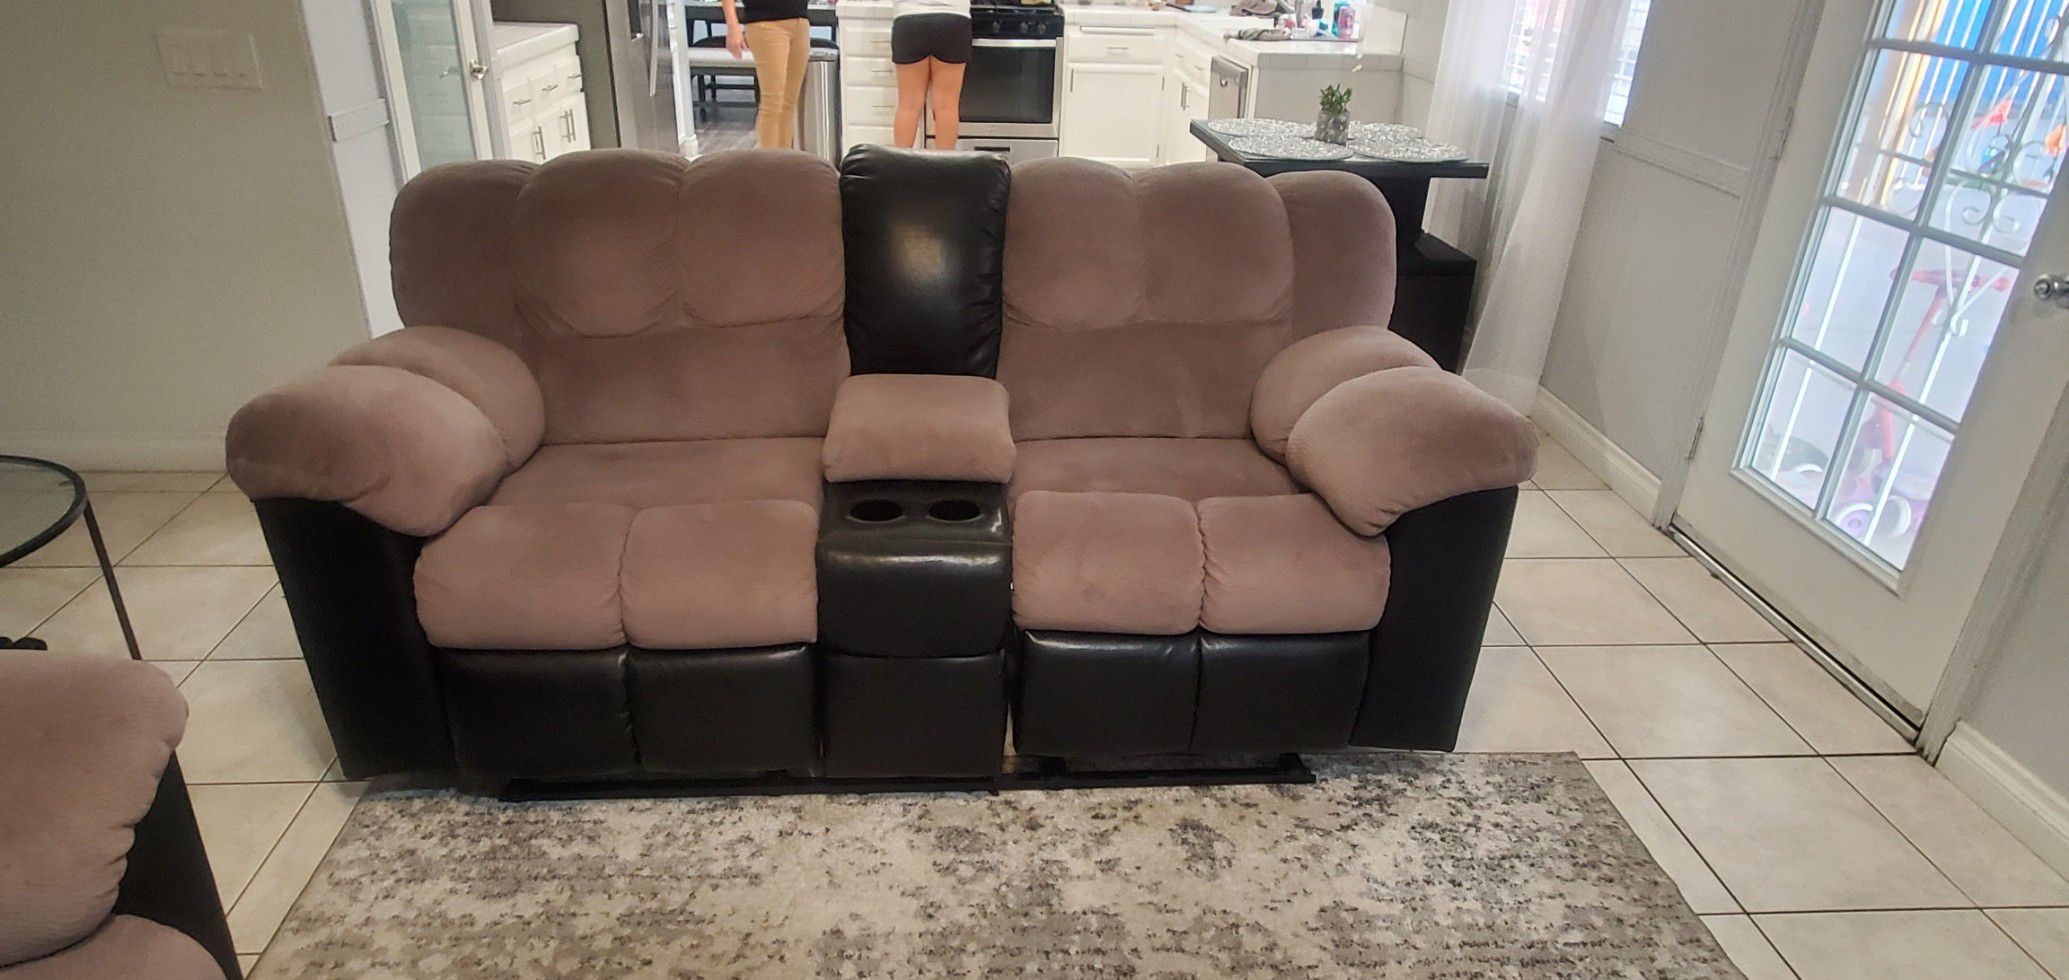 Reclining love seat couch/sofa